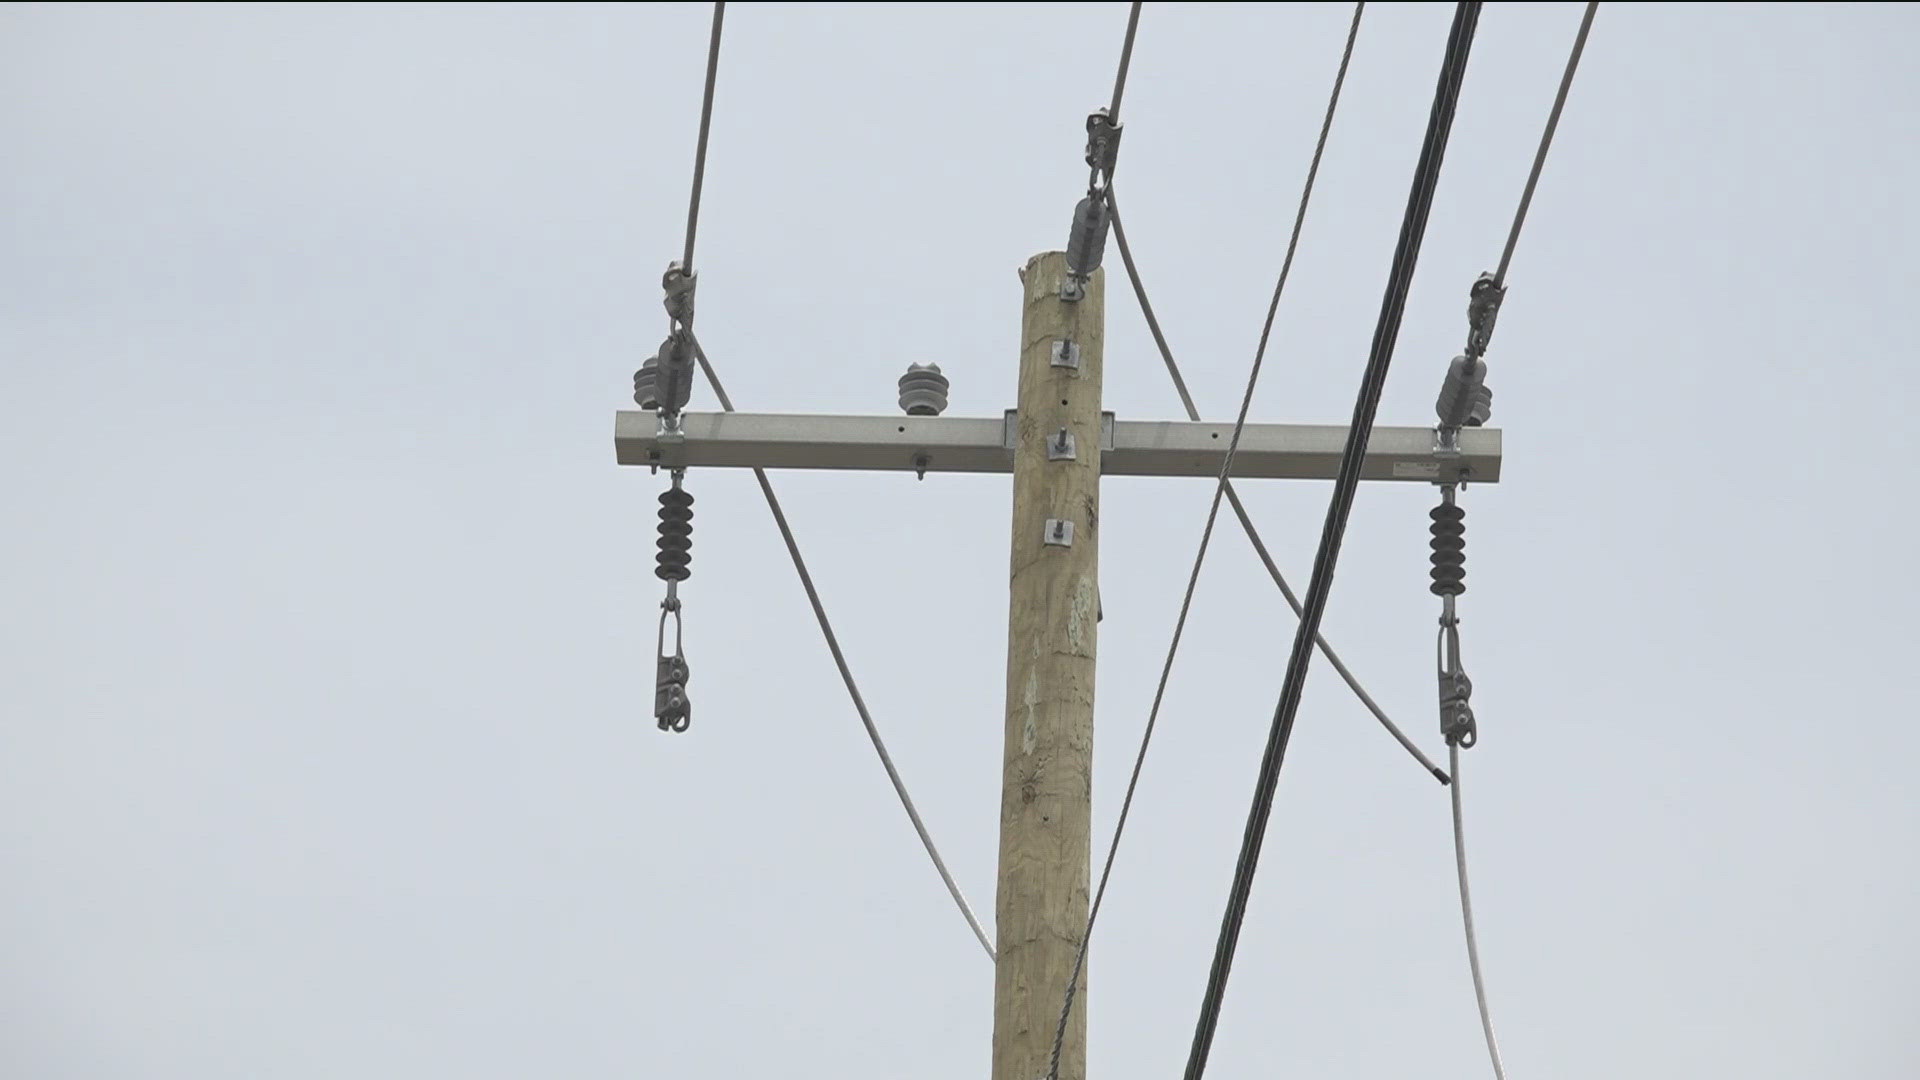 The lingering outages could last for days.